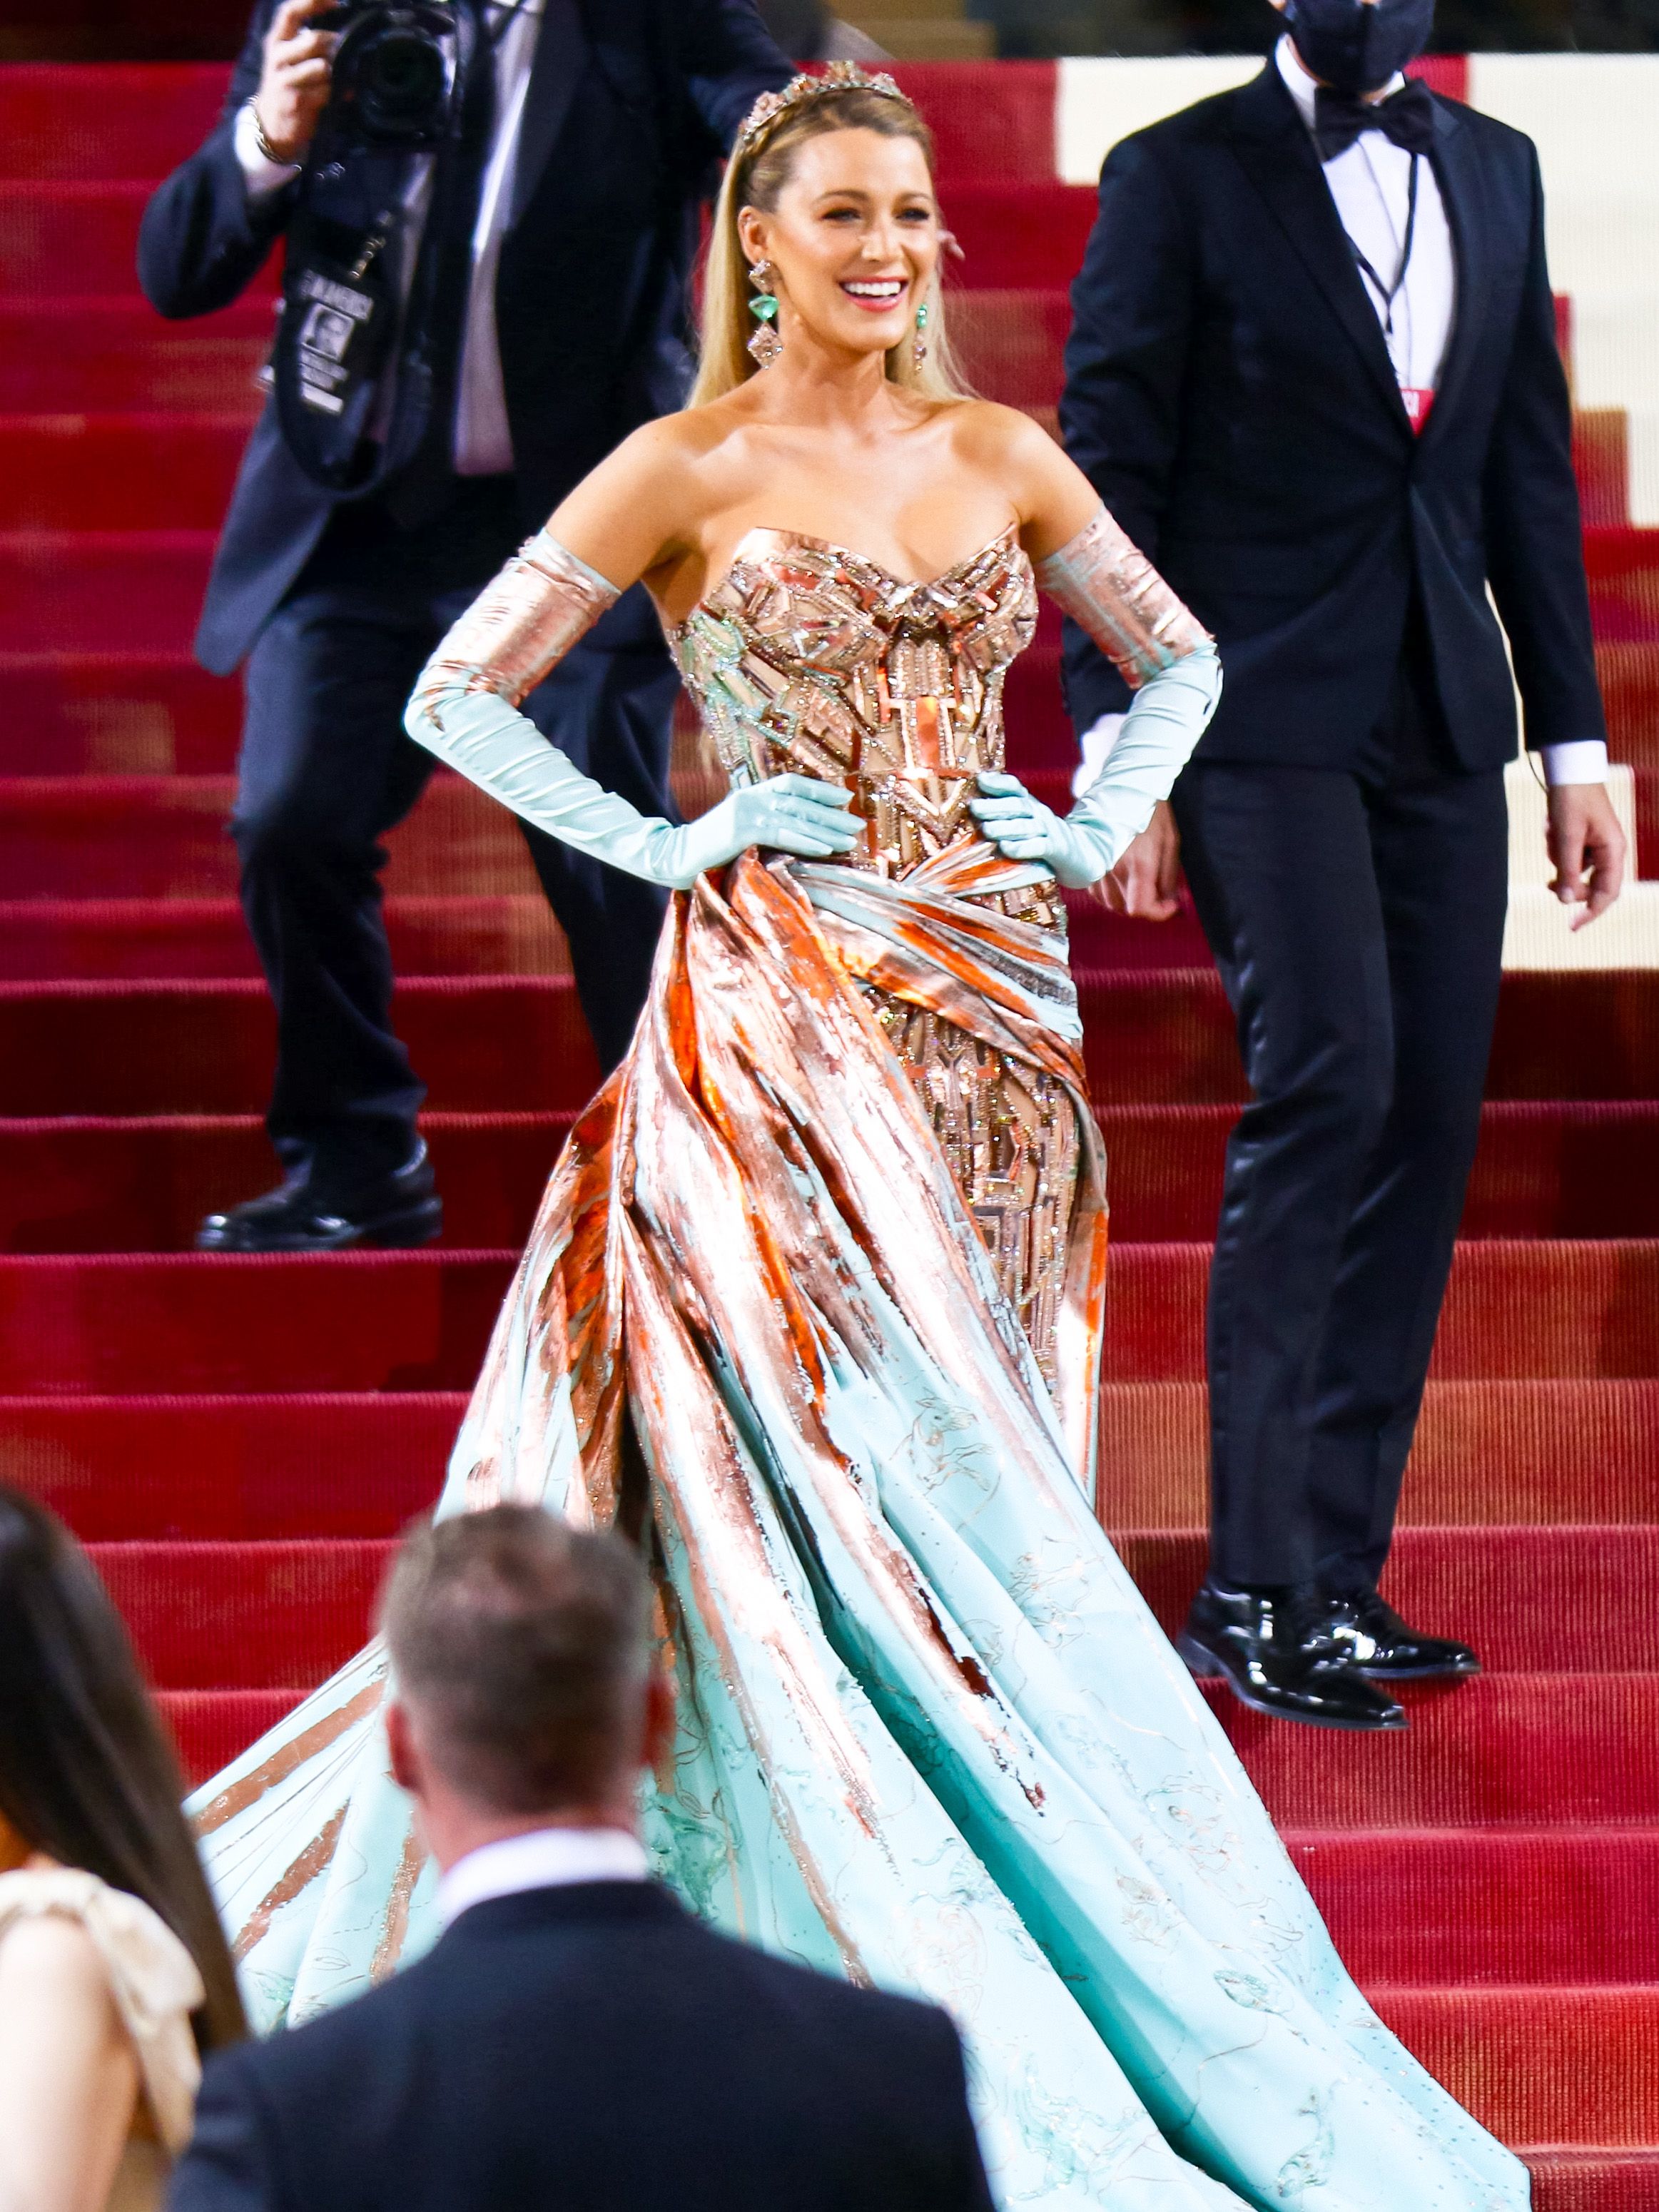 Blake Lively during the 2022 Met Gala Celebrating "In America: An Anthology of Fashion" at The Metropolitan Museum of Art on May 02, 2022 in New York City. | Source: Getty Images